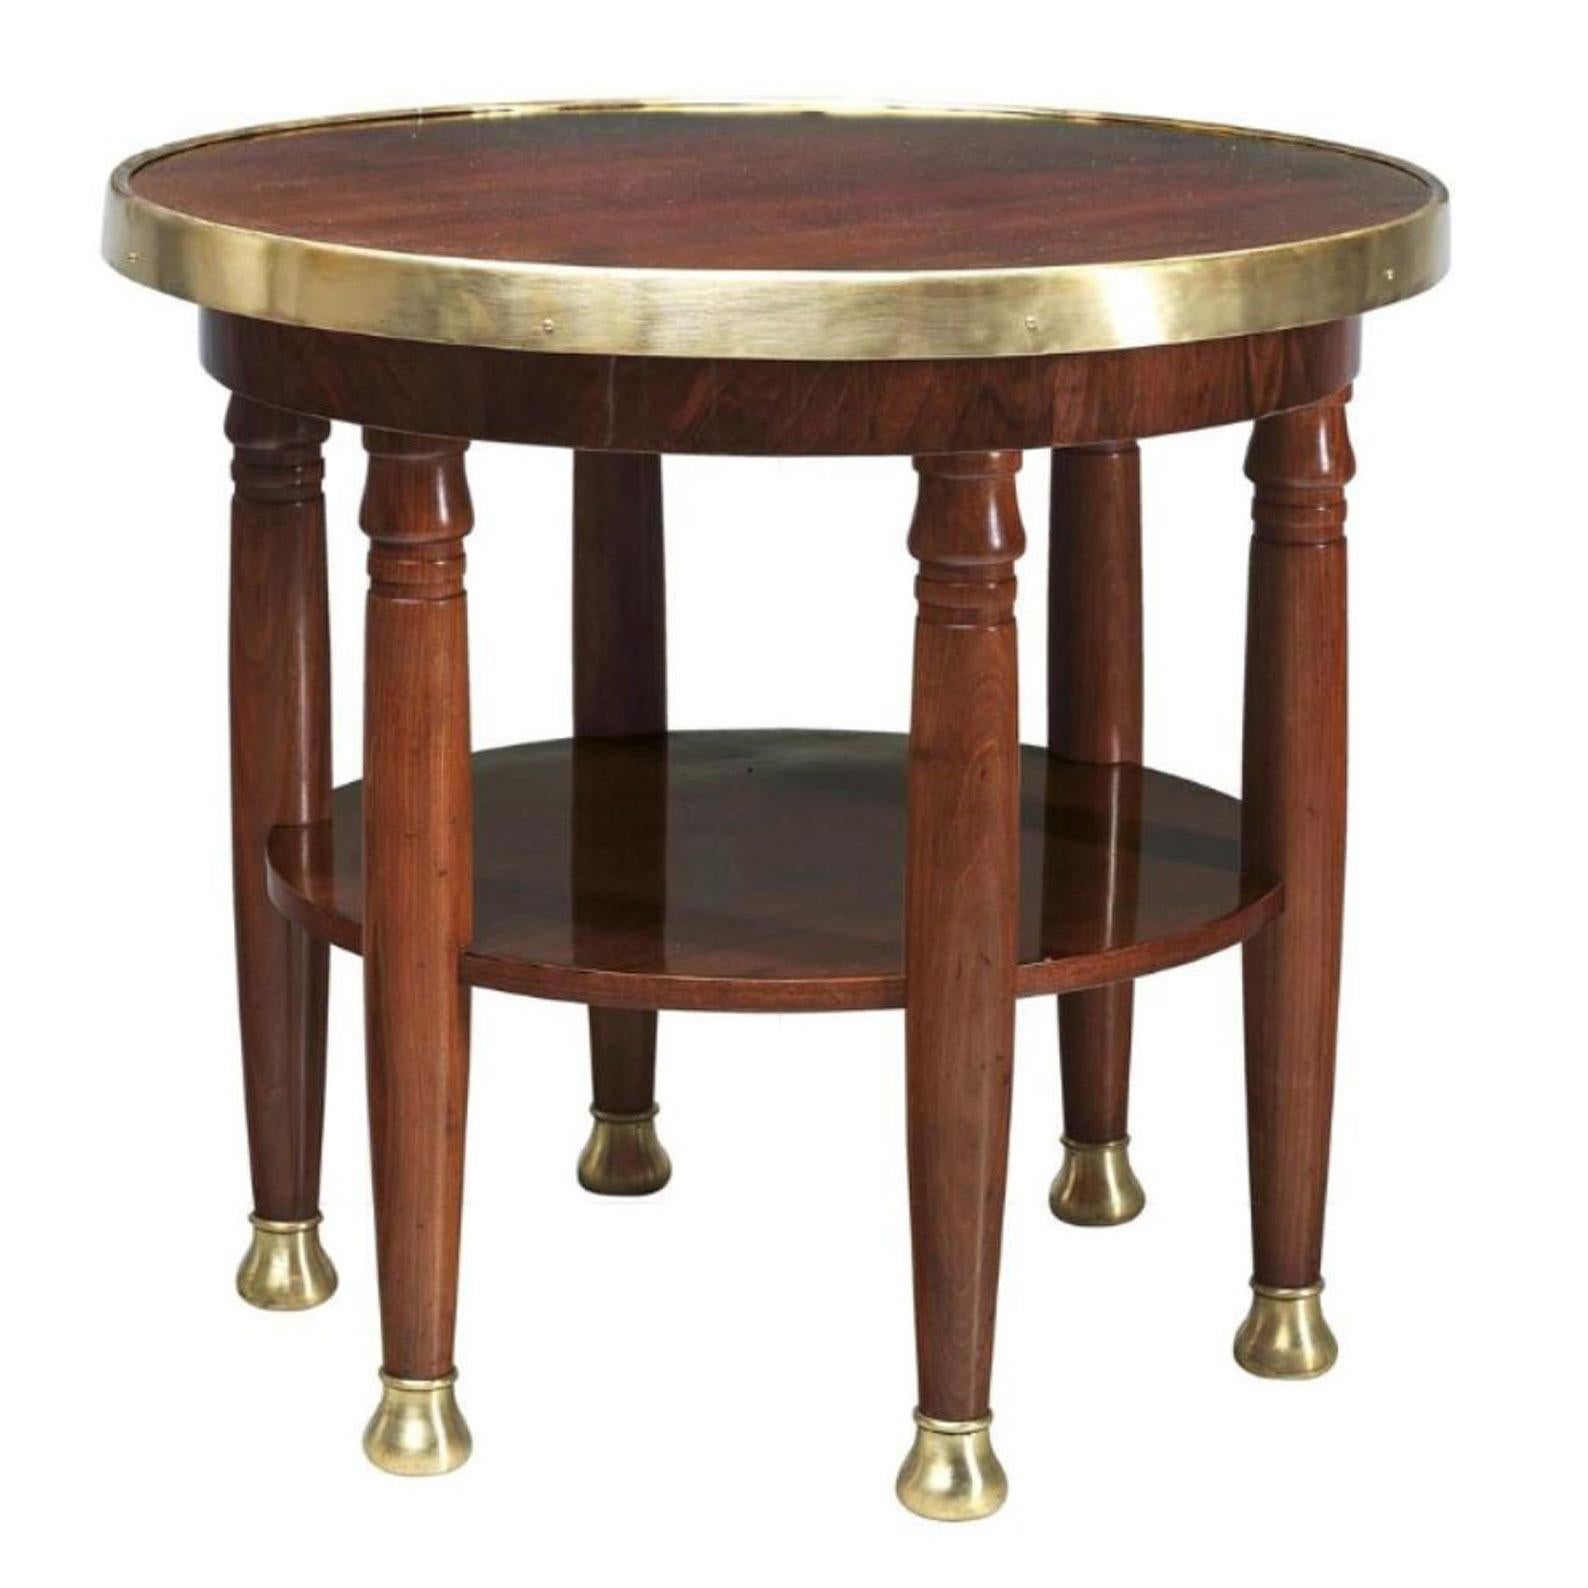 Designed by Adolf Loos in circa 1902, turned hardwood and softwood frame on multiple legs, with walnut veneer and polished finish, brass edged top and brass sabots, height c. 74 cm, diameter c. 80 cm, in restored condition. Adolf Loos first used a